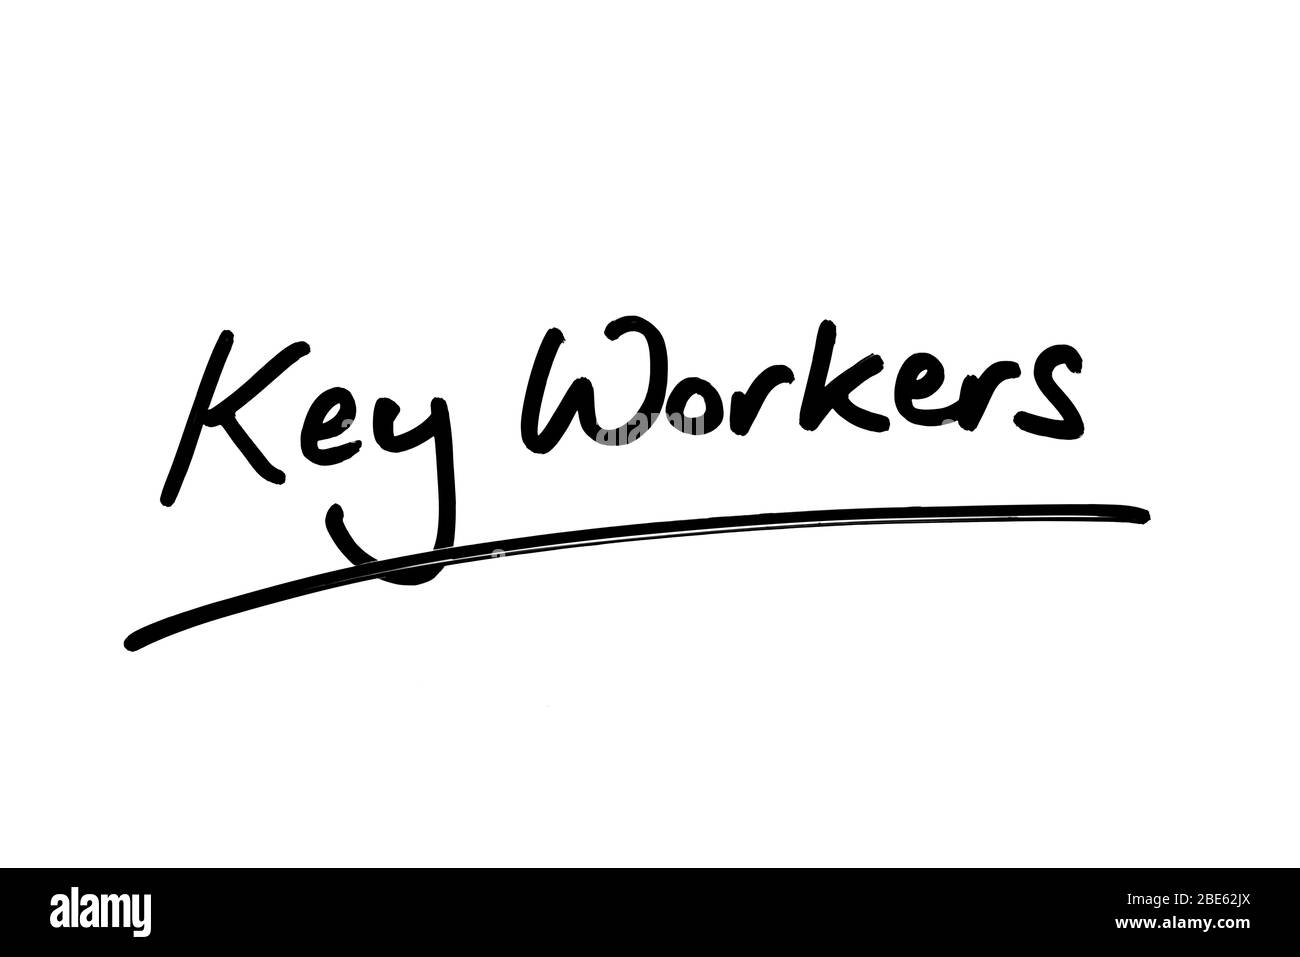 Key Workers handwritten on a white background. Stock Photo